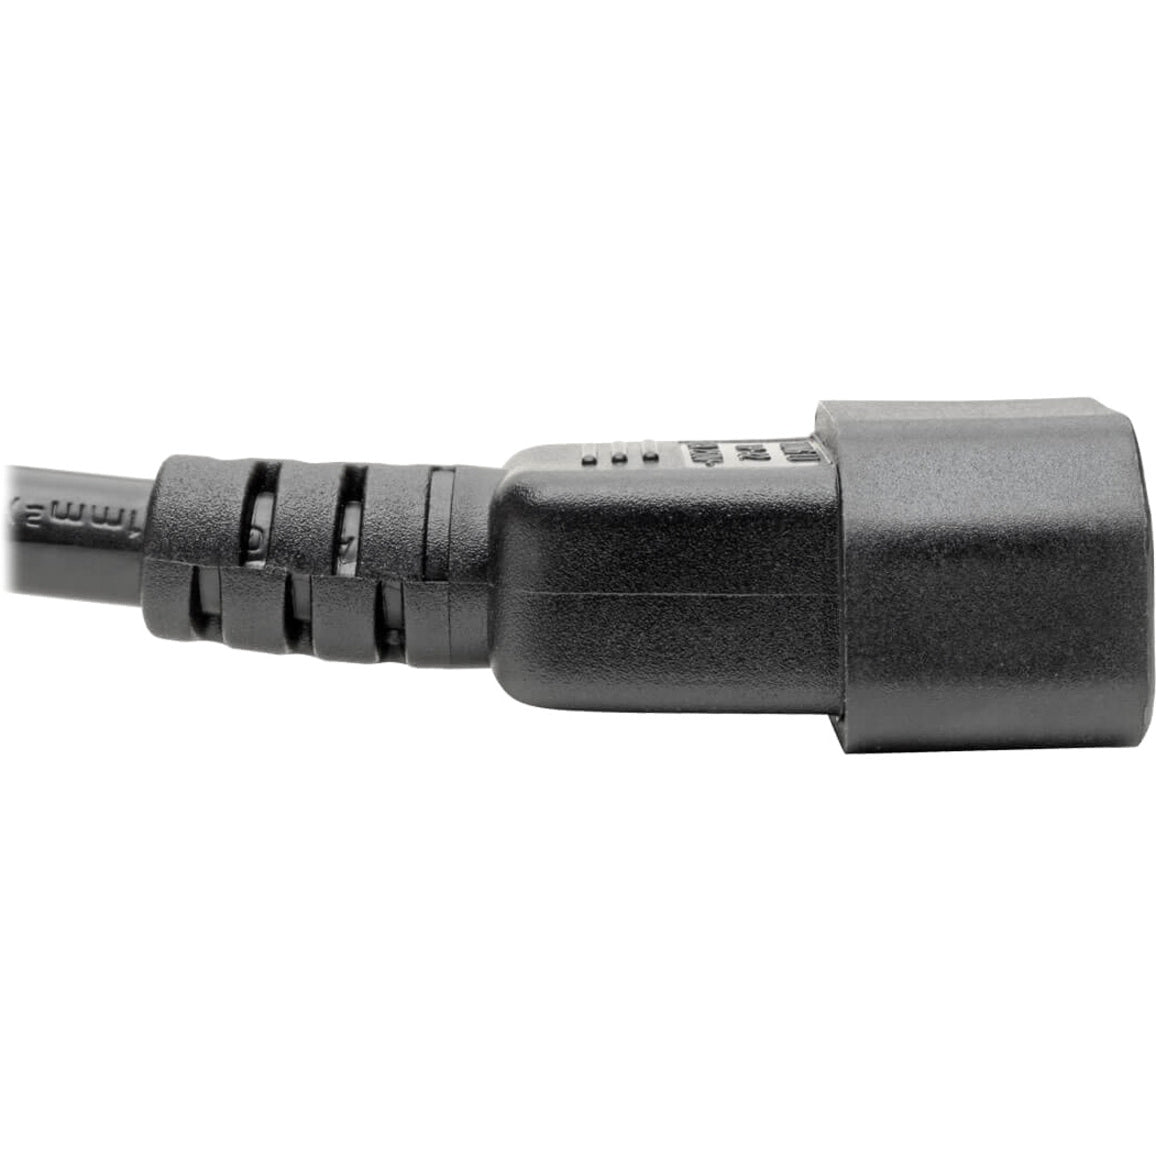 Tripp Lite P047-006-10A Power Interconnect Cord, 10-ft. 16AWG, IEC-320-C19 to IEC-320-C14